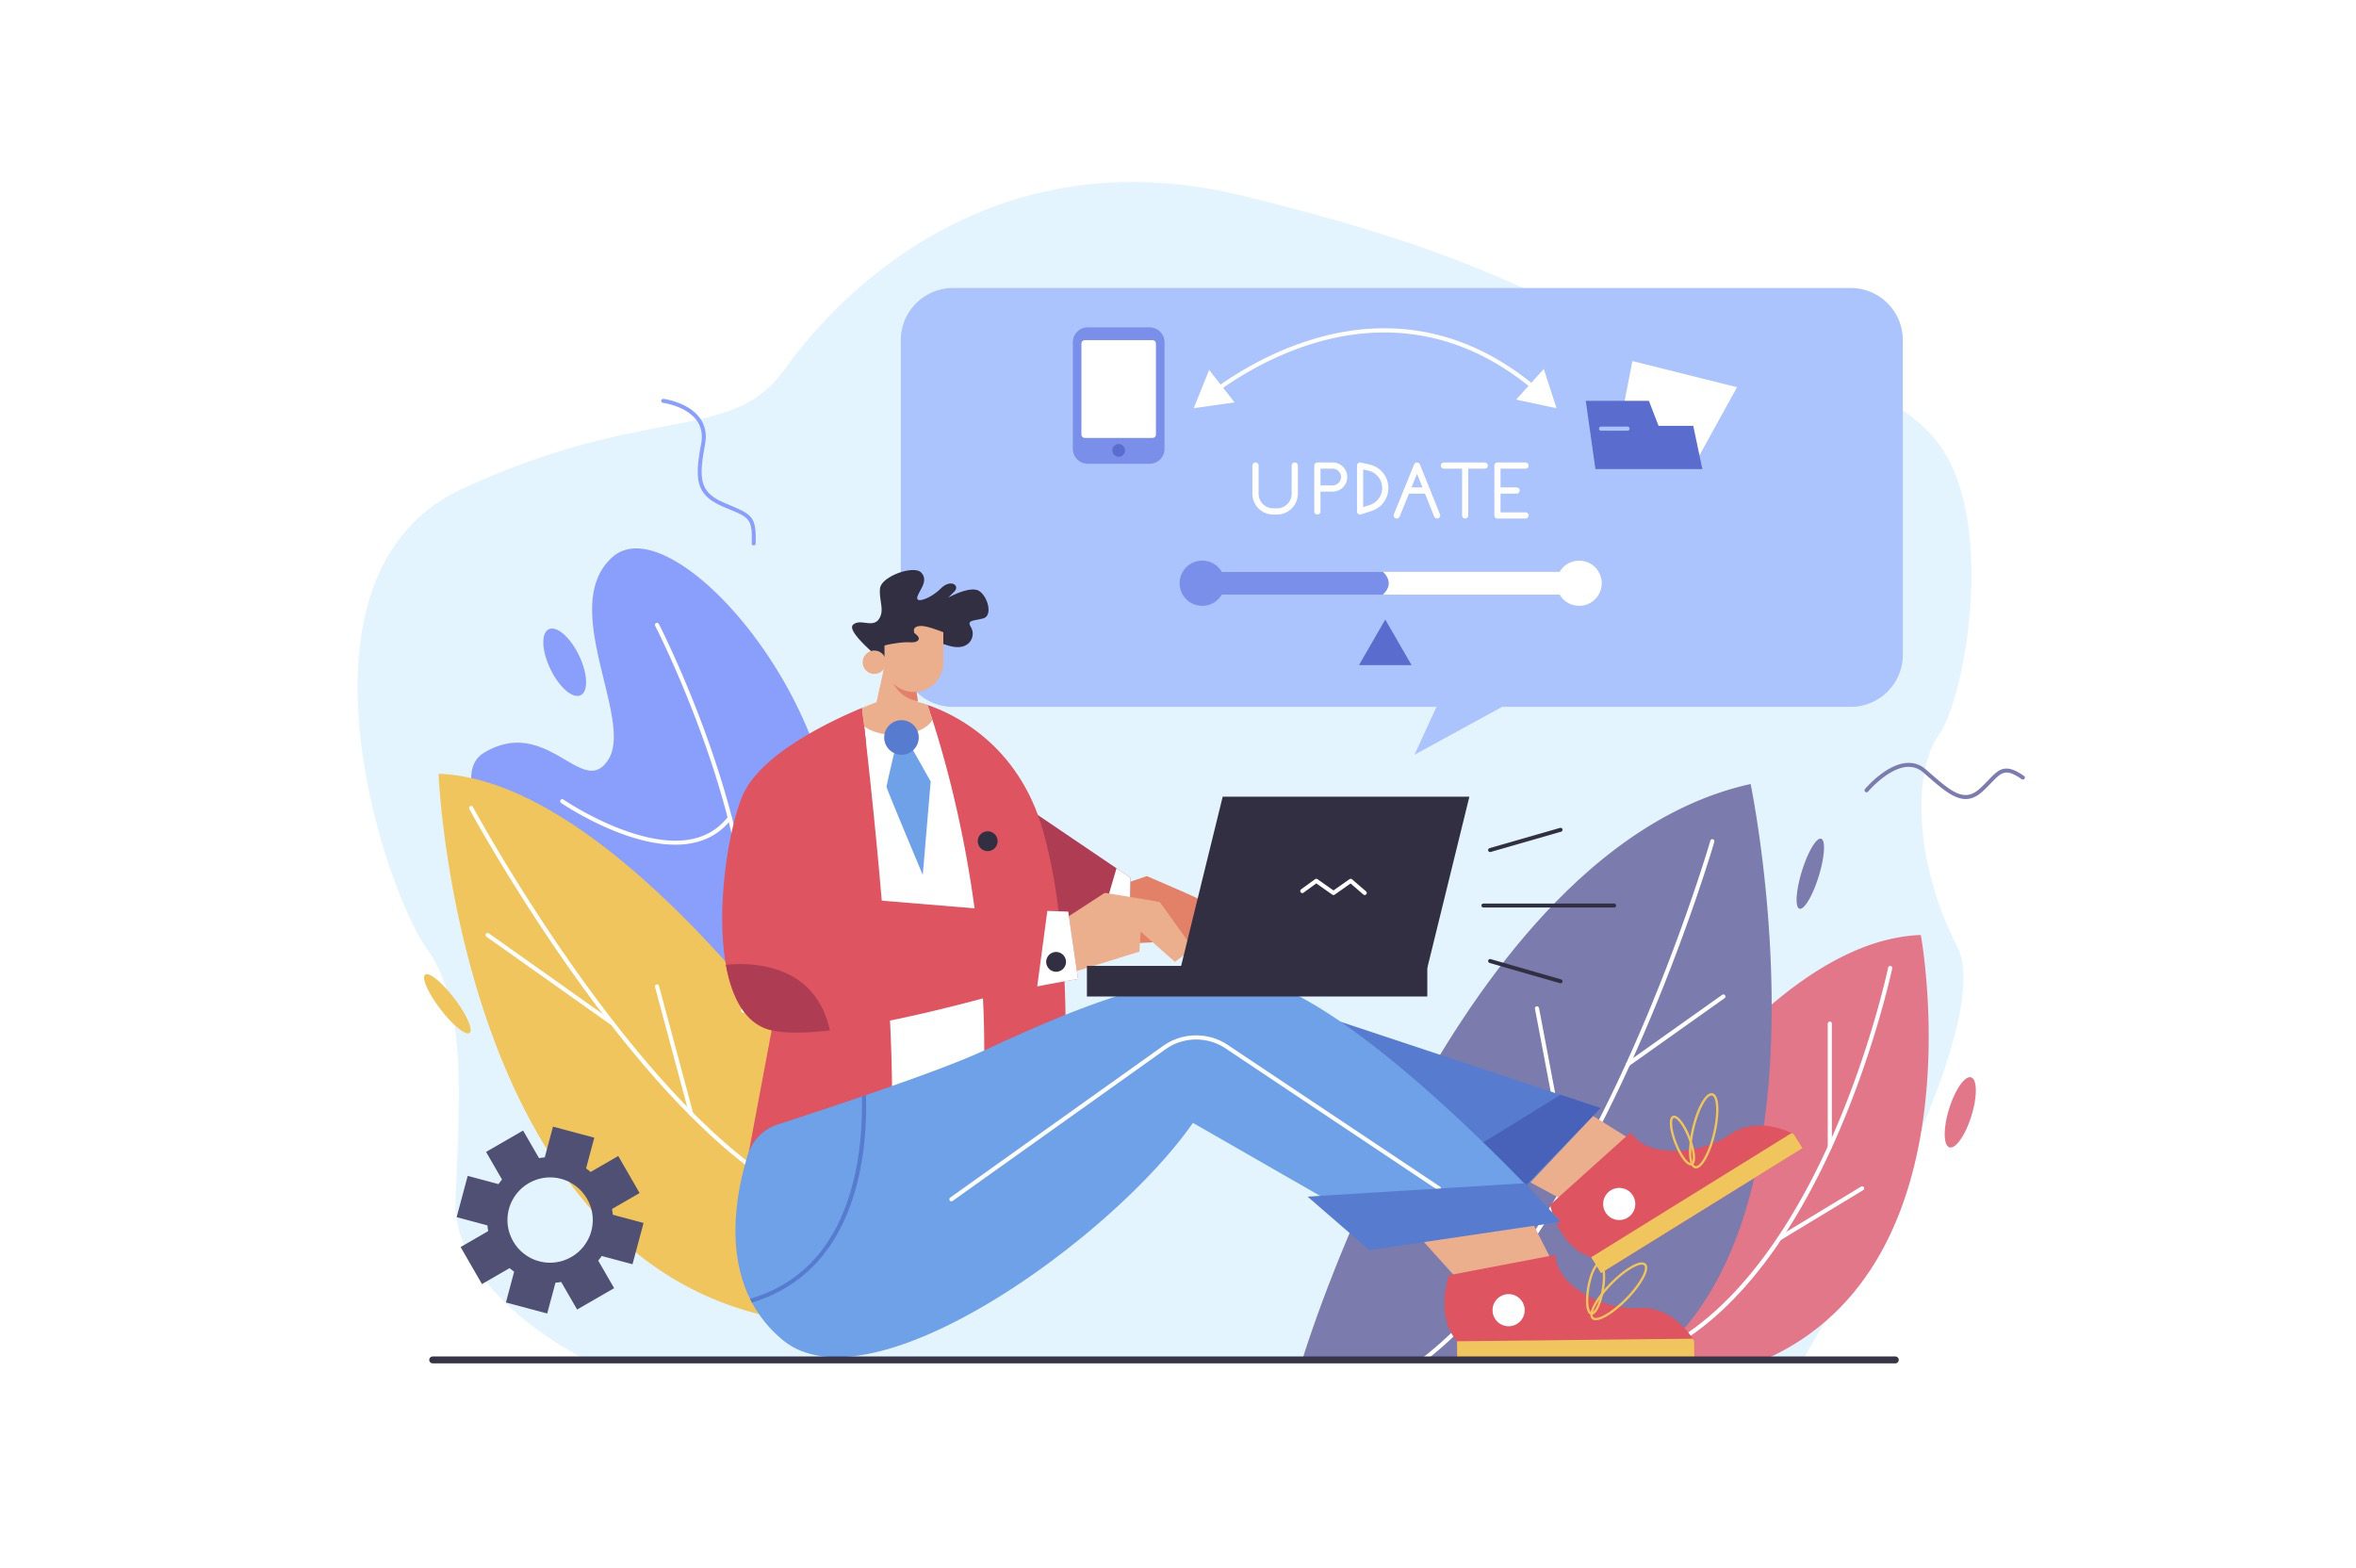 Vector image of a person on a laptop with "update" above the laptop.